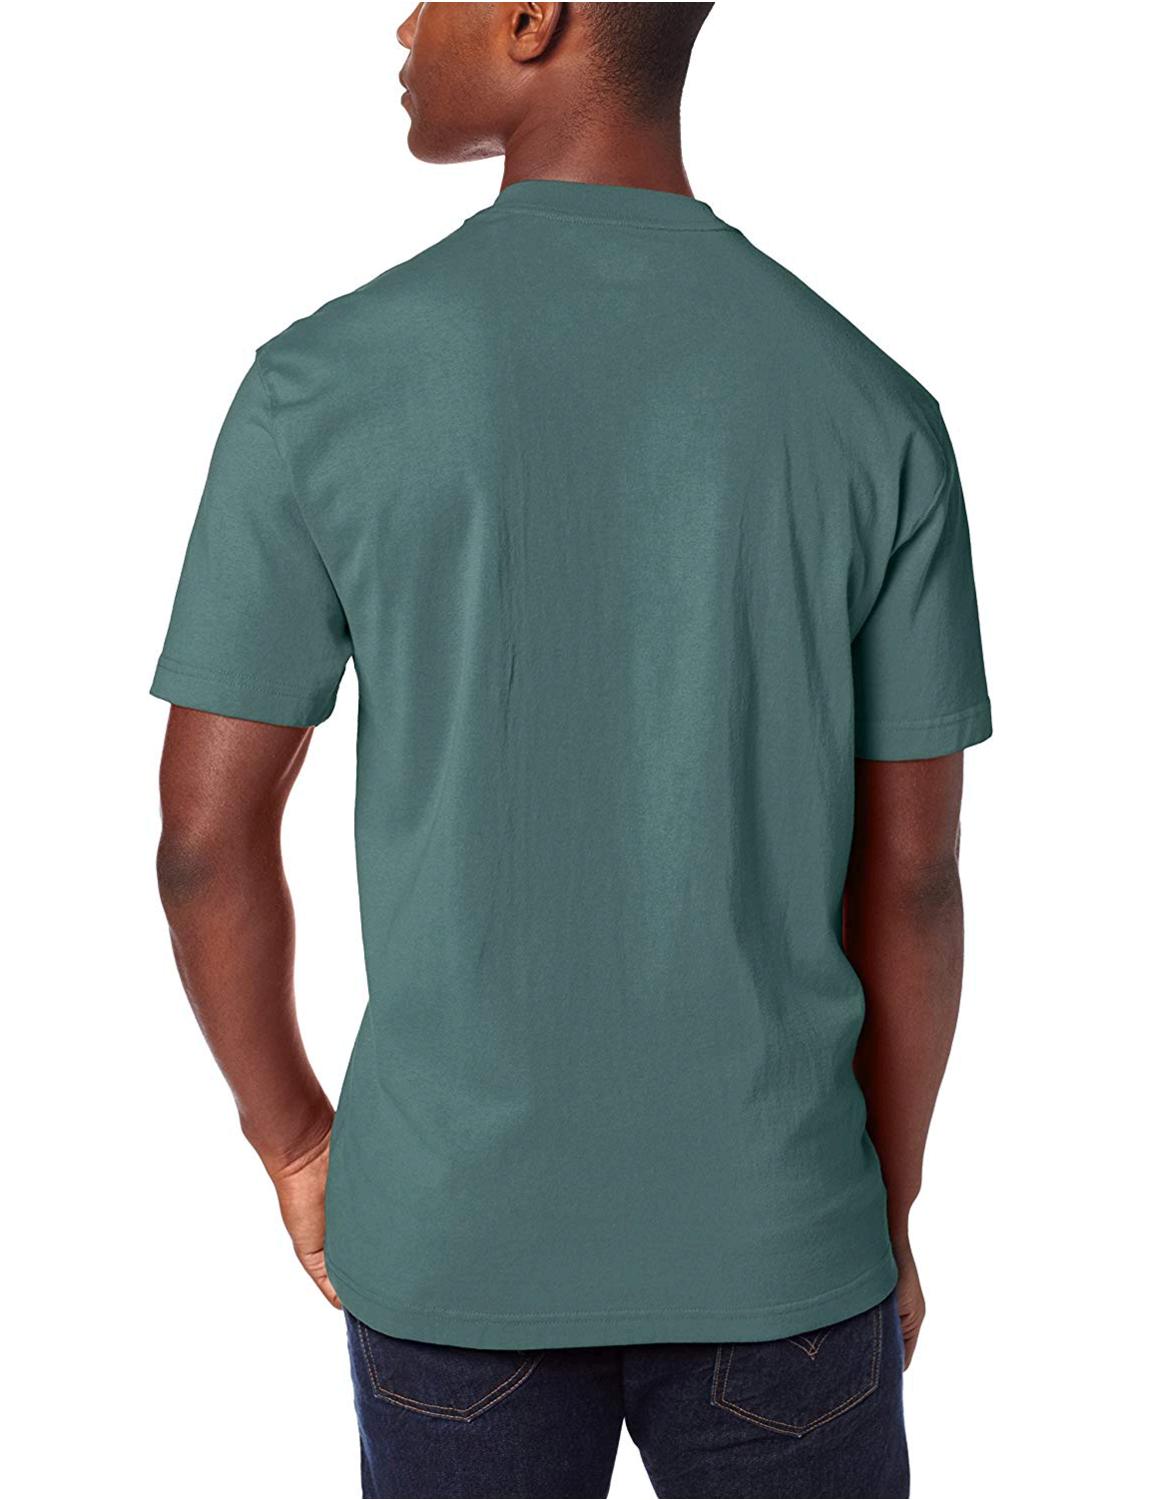 Dickie's Men's Heavyweight Crew Neck Short, Lincoln Green, Size Large ...